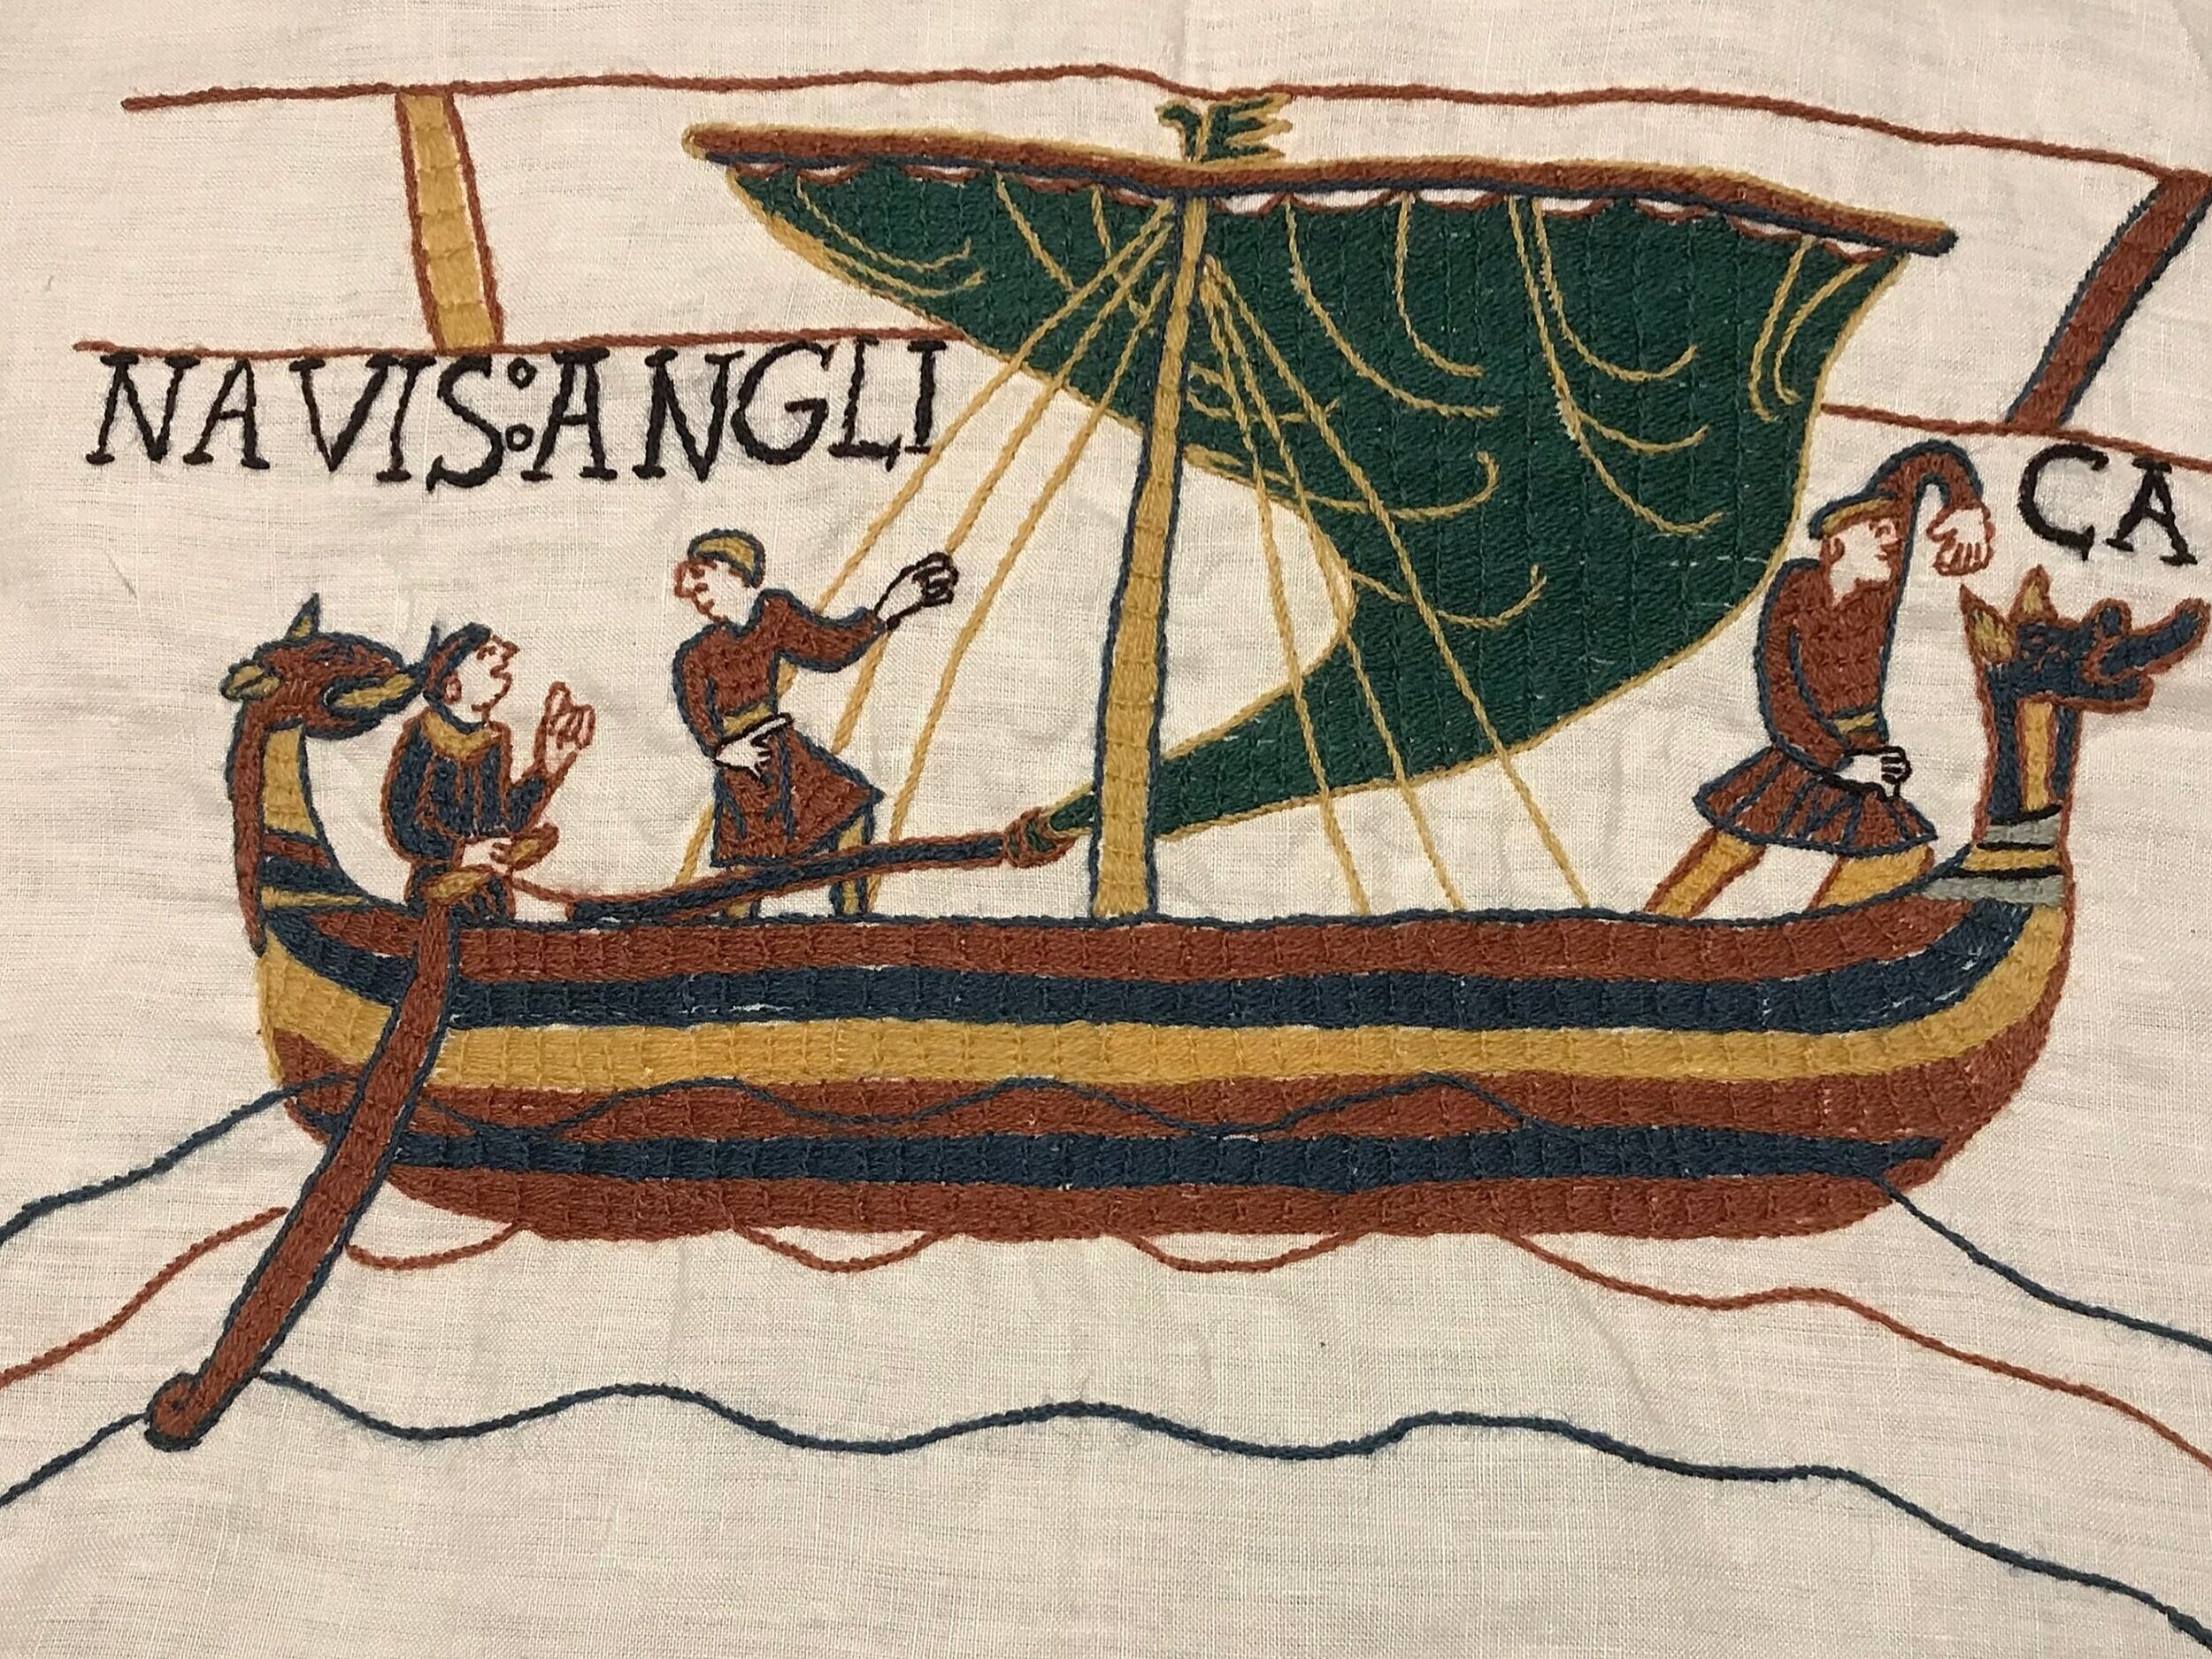 Replica of small section of Bayeaux Tapestry